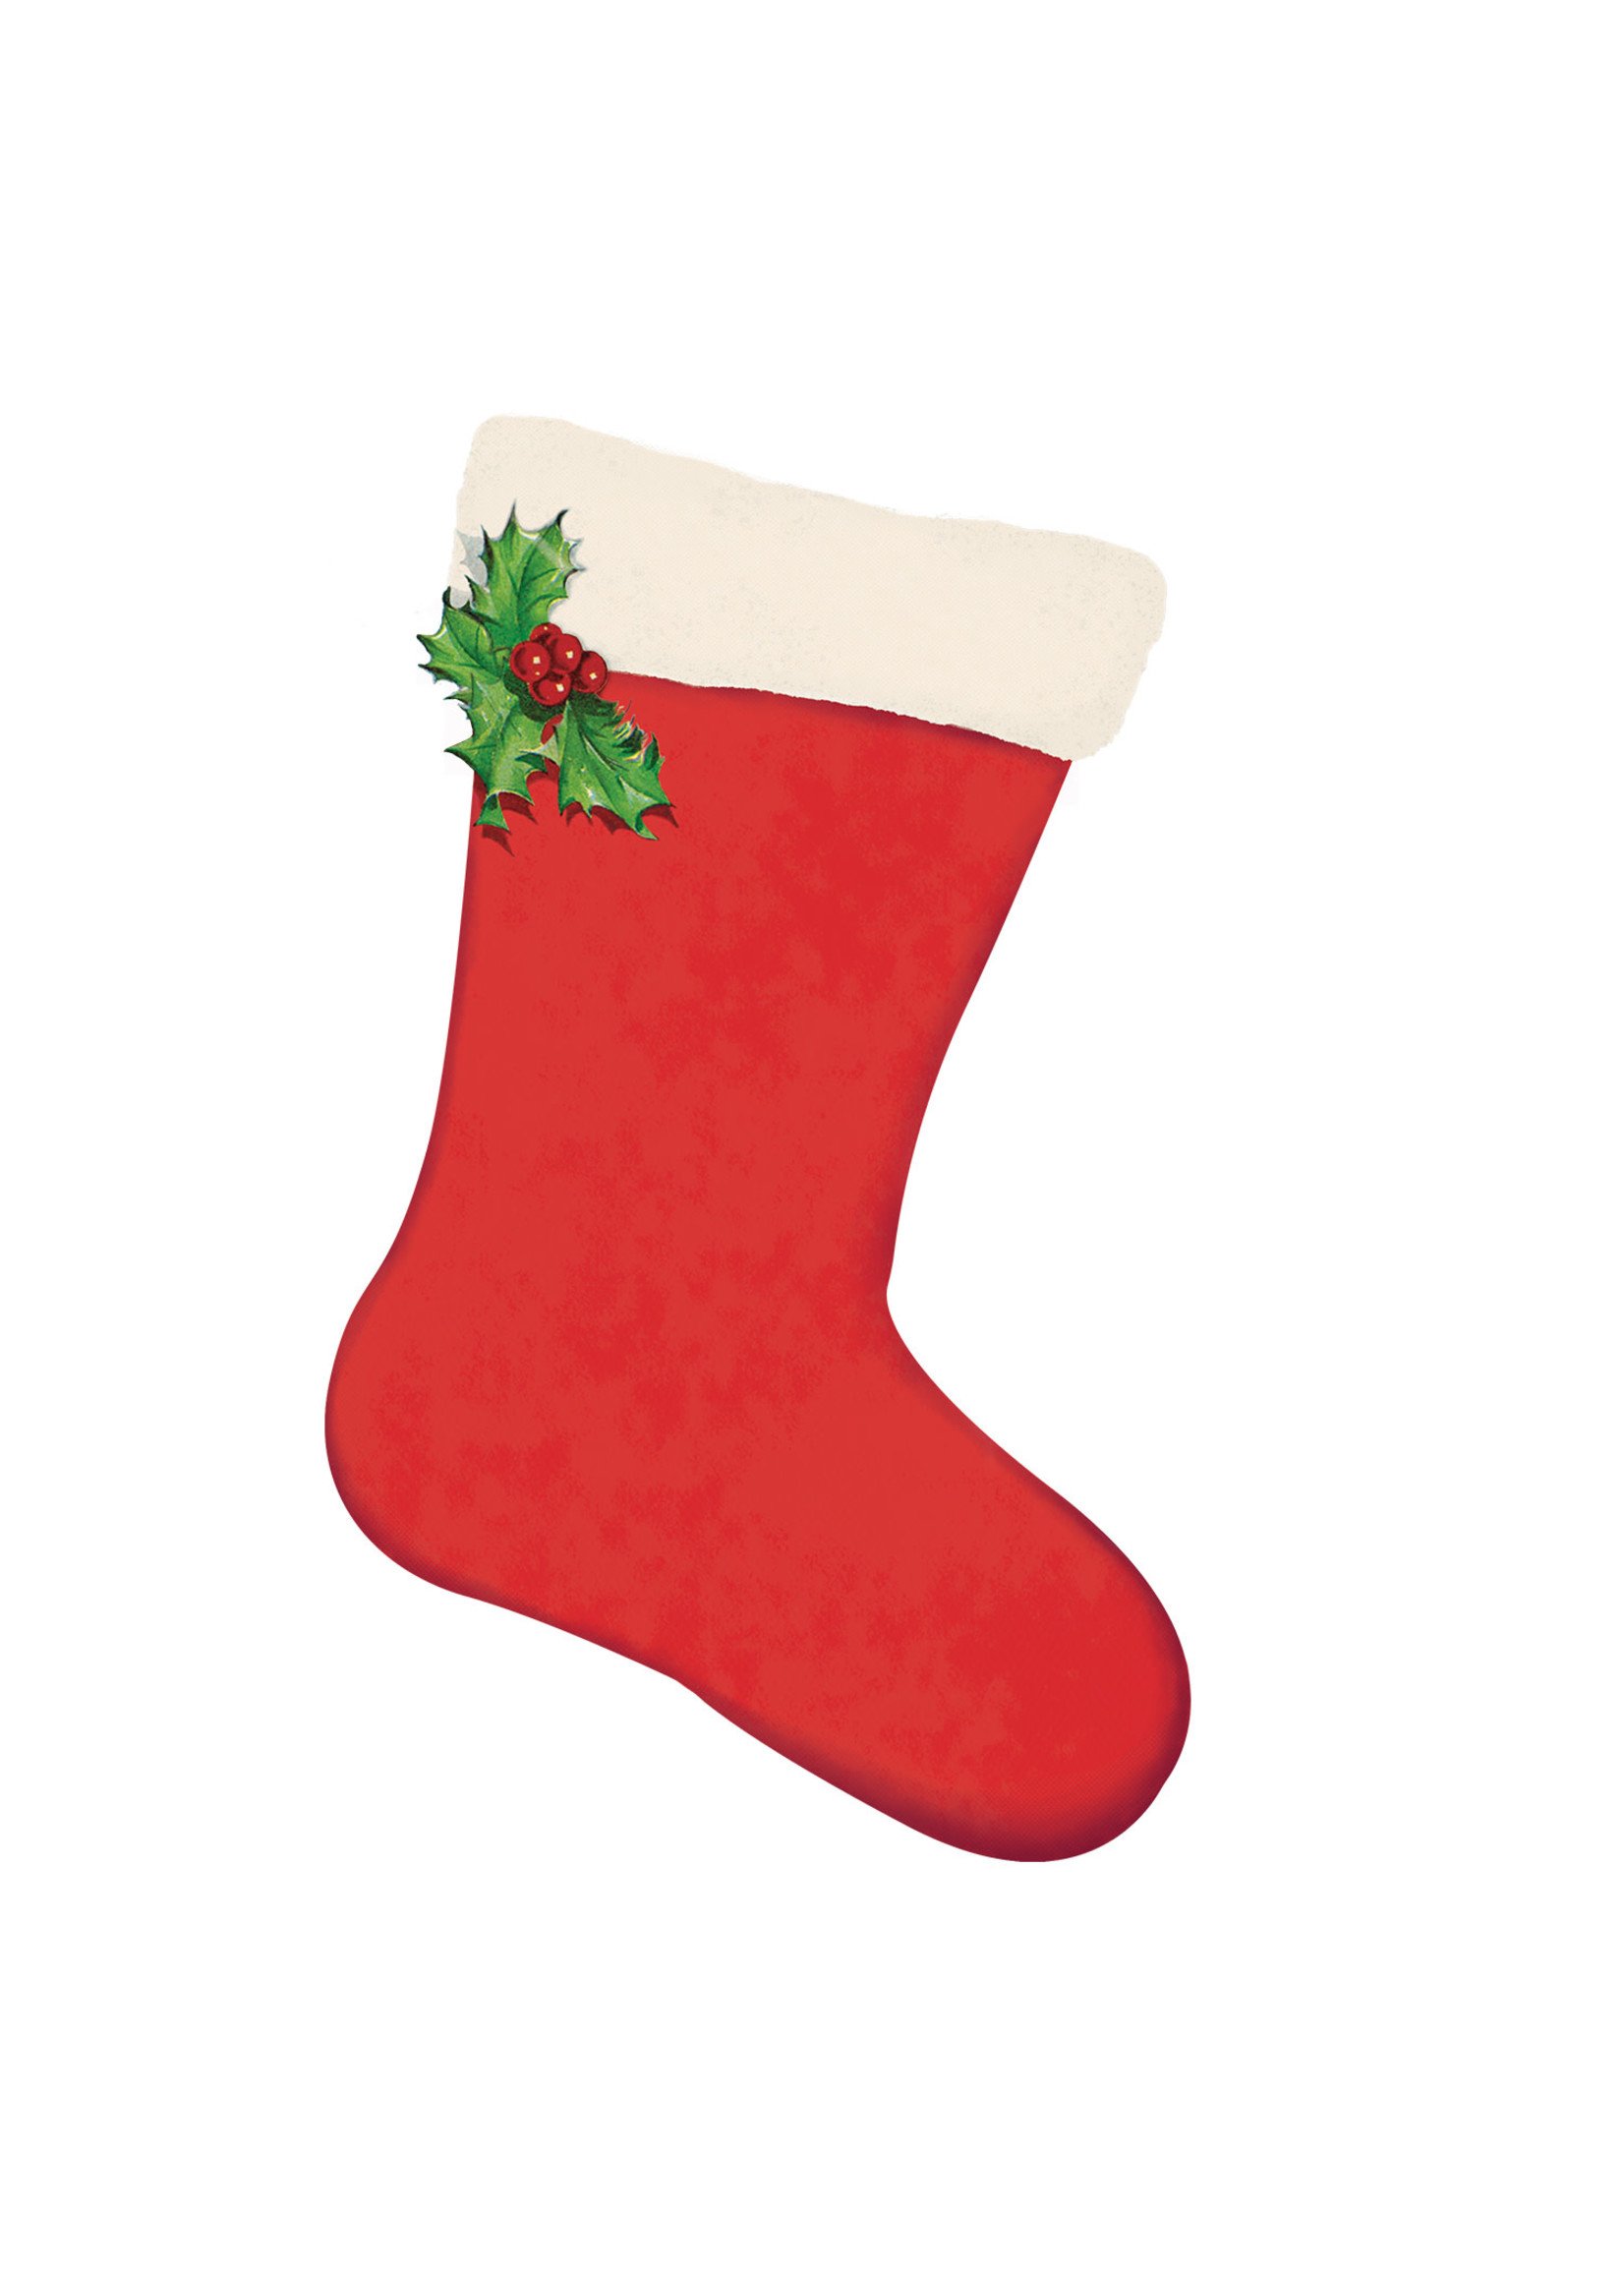 Hester & Cook Table Accents - Stocking (pack of 12)